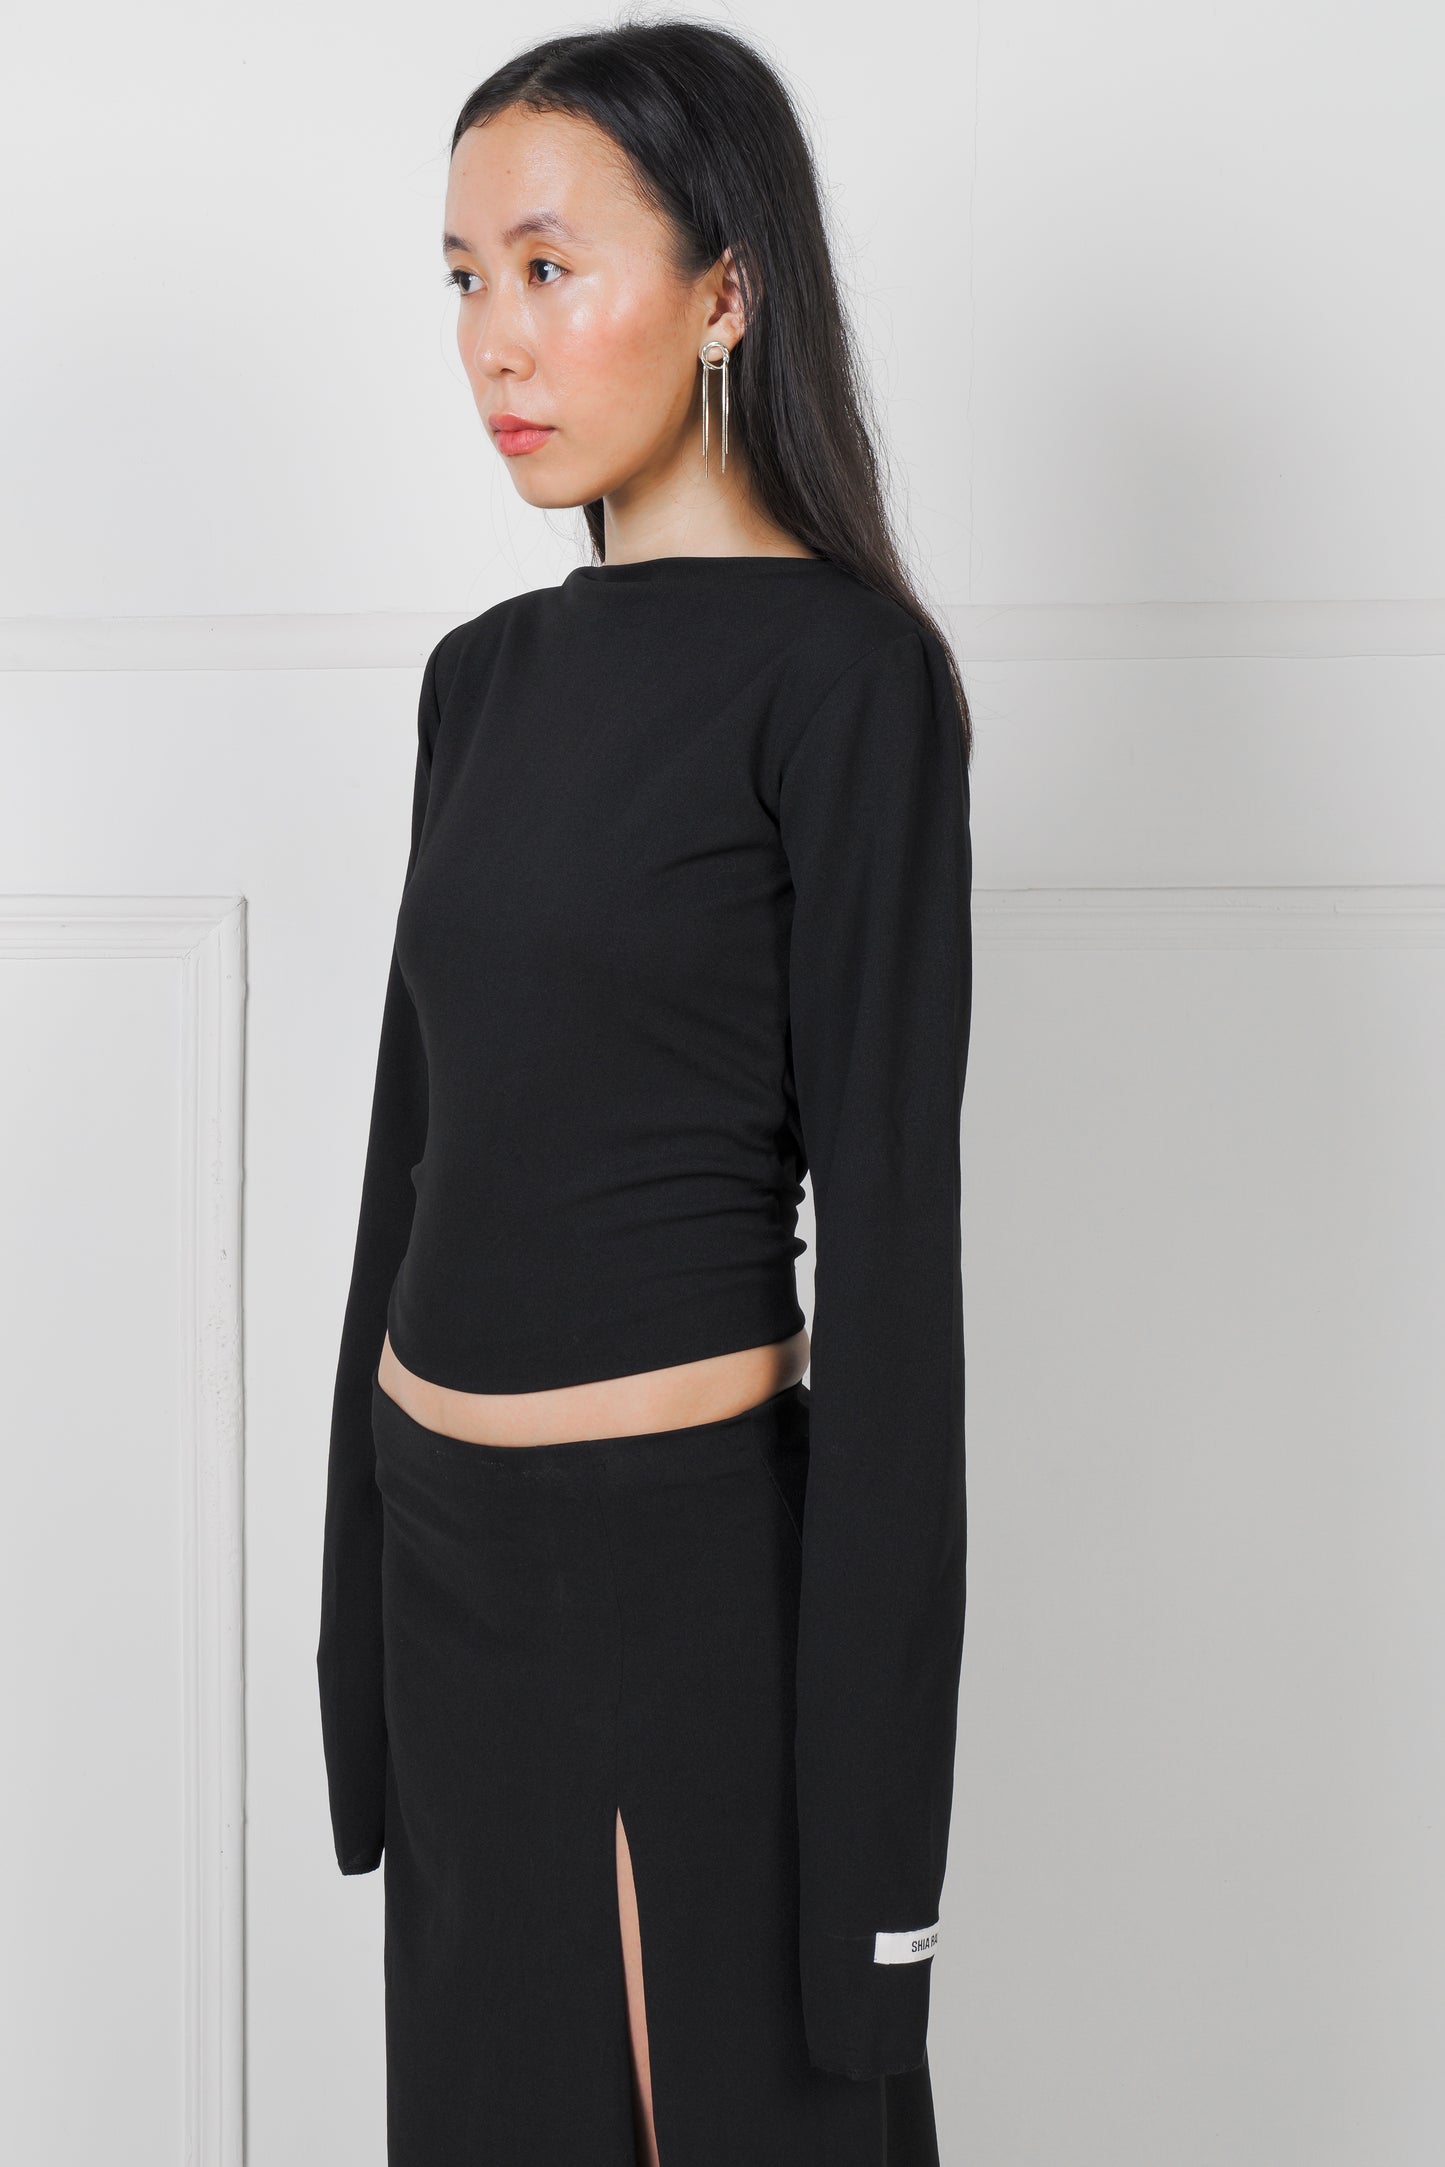 Top with Bell Sleeve Details